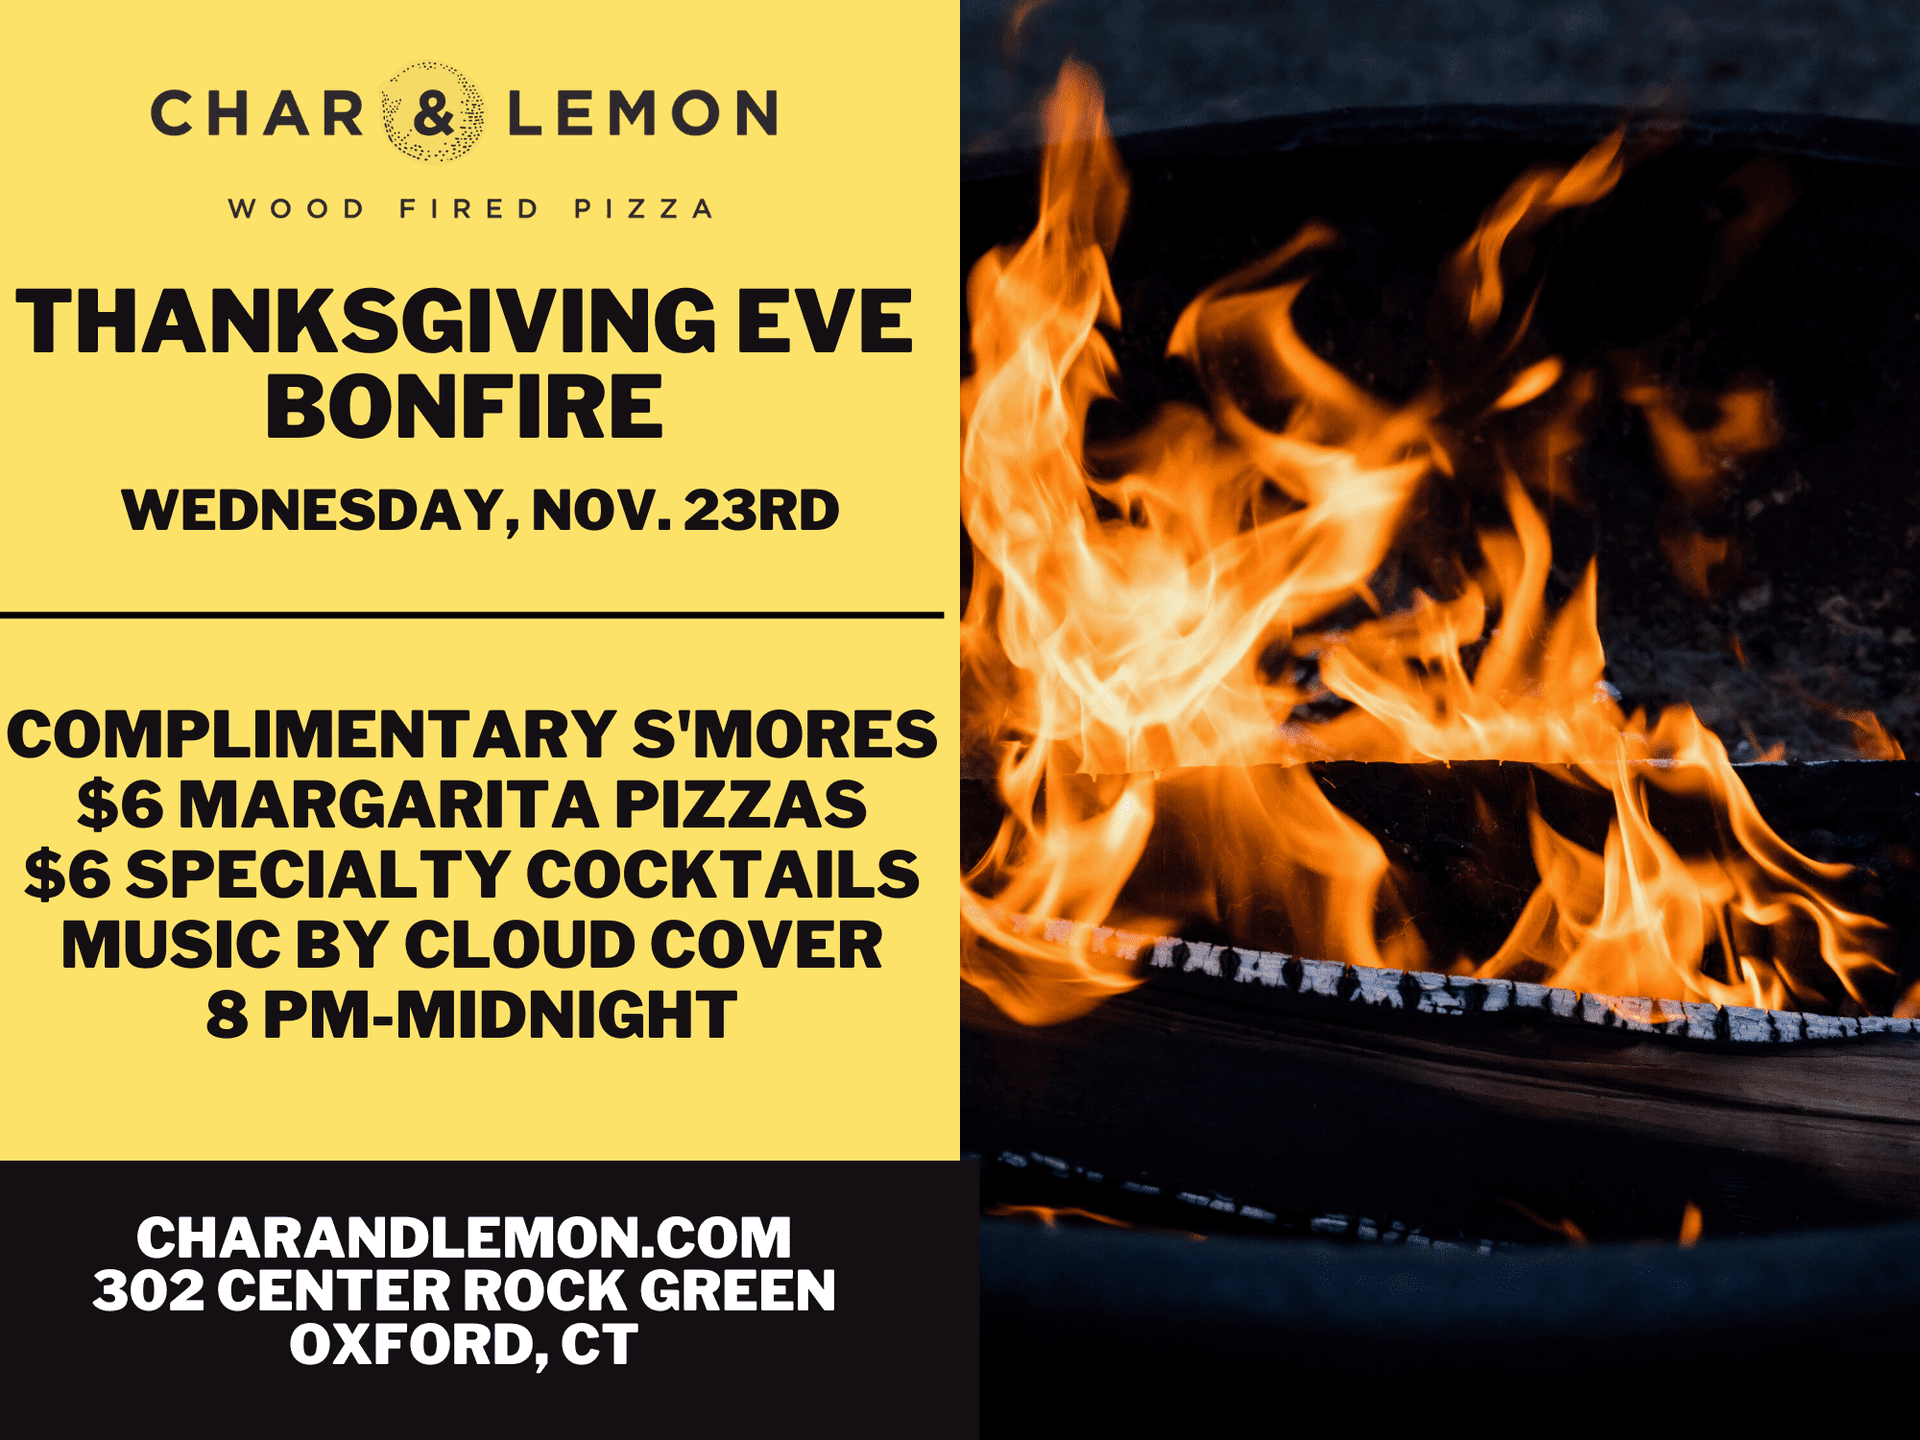 Join us for a Thanksgiving Eve Bonfire from 8 PM-Midnight!